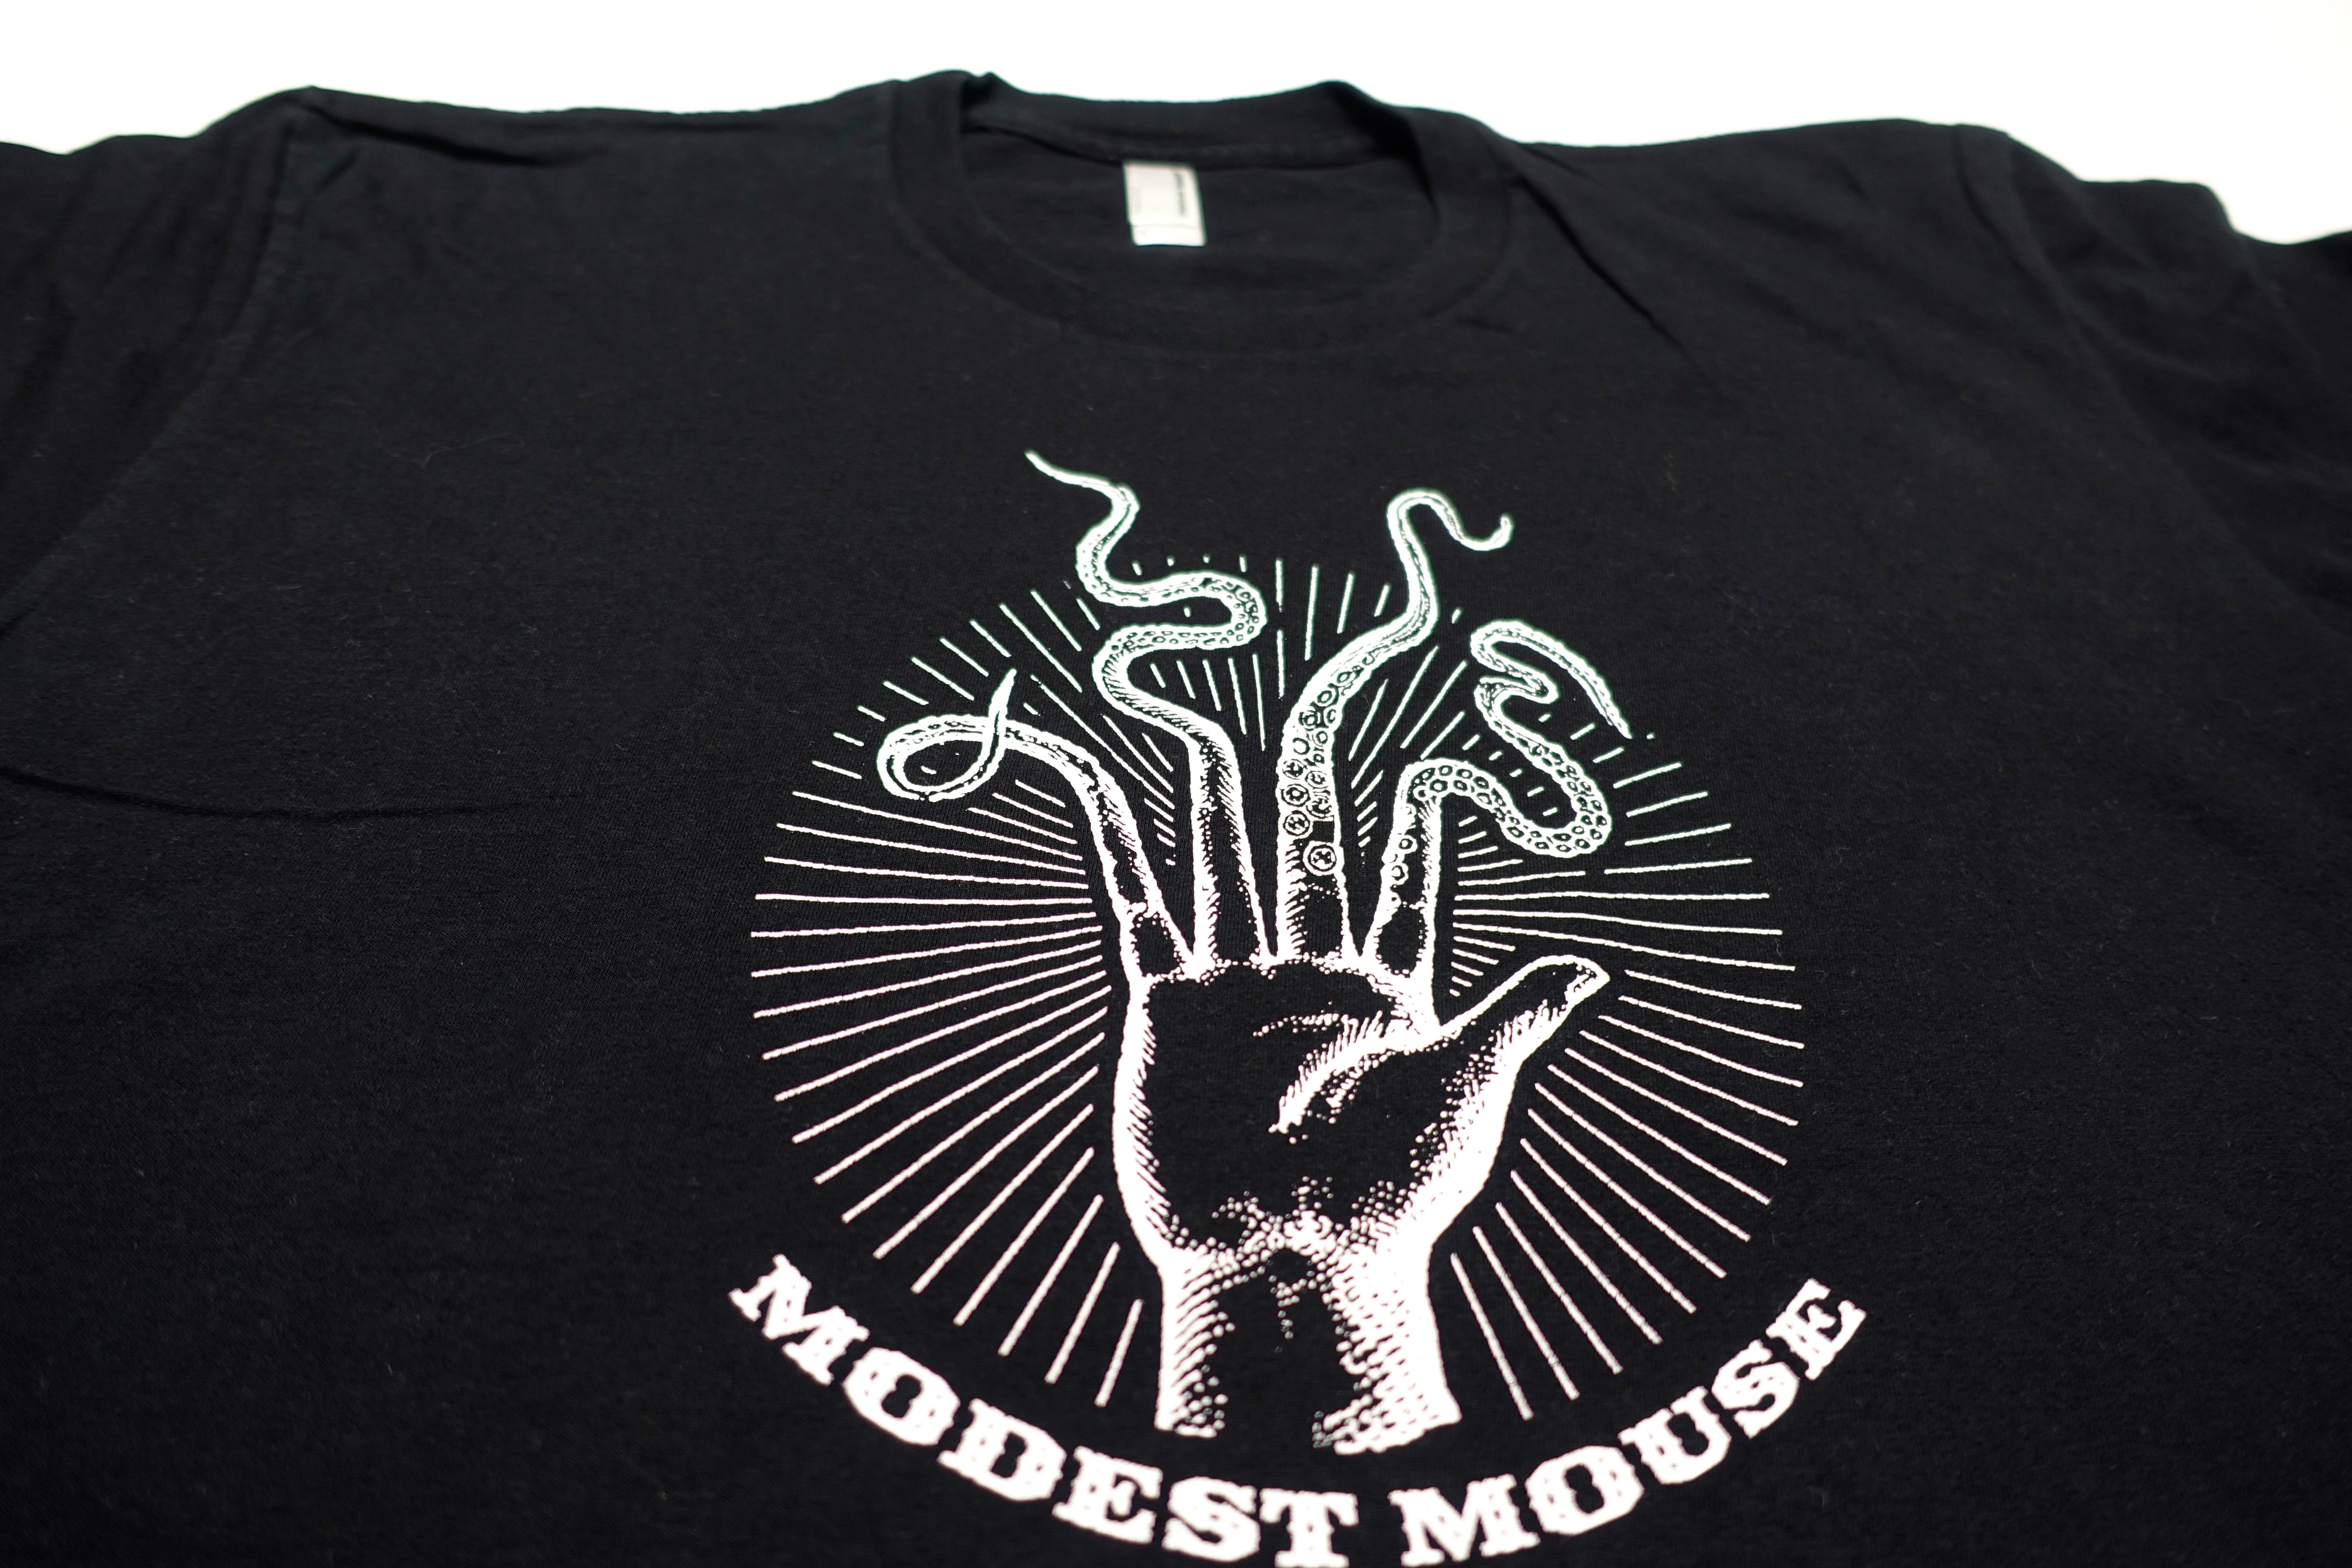 Modest Mouse - Dashboard / Snake Hand 2007 Tour Shirt Size Large